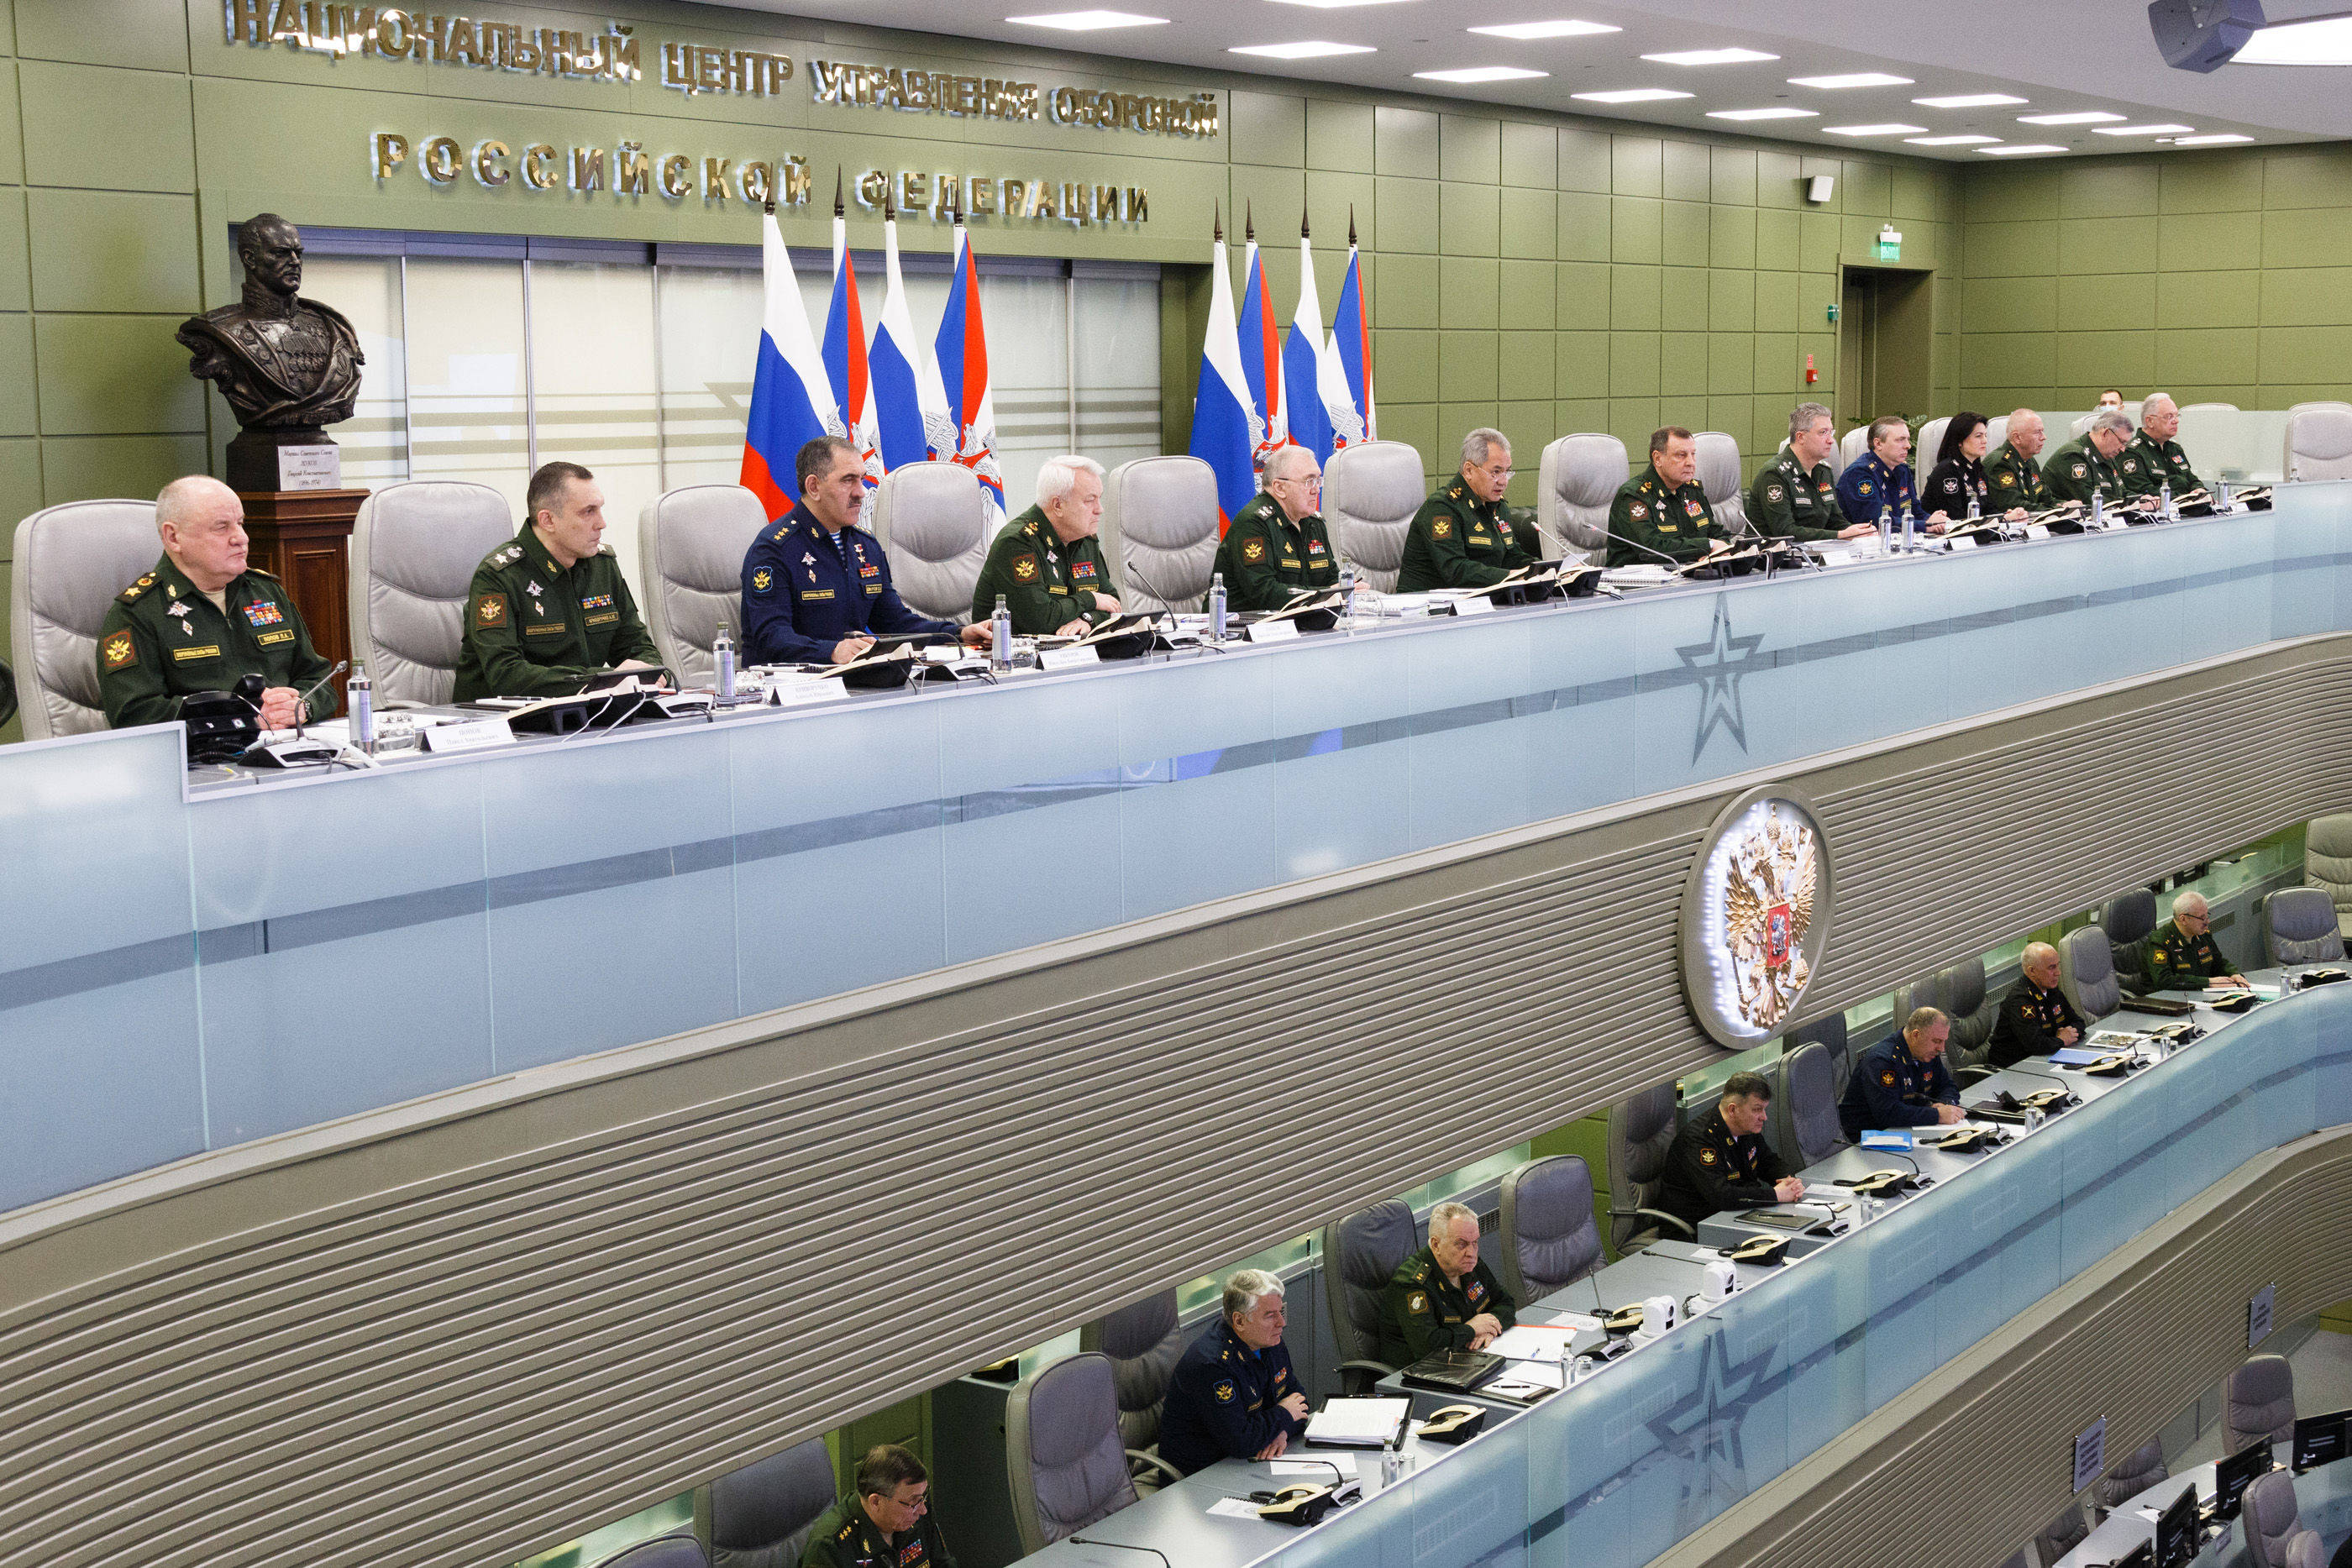 IRussian Defence Minister Sergei Shoigu speaks during a video conference meeting at the Russian National Defence Management Centre, in Moscow, Russia. /Credit:Vadim Savitskii/SPUTNIK/SIPA/2203011243